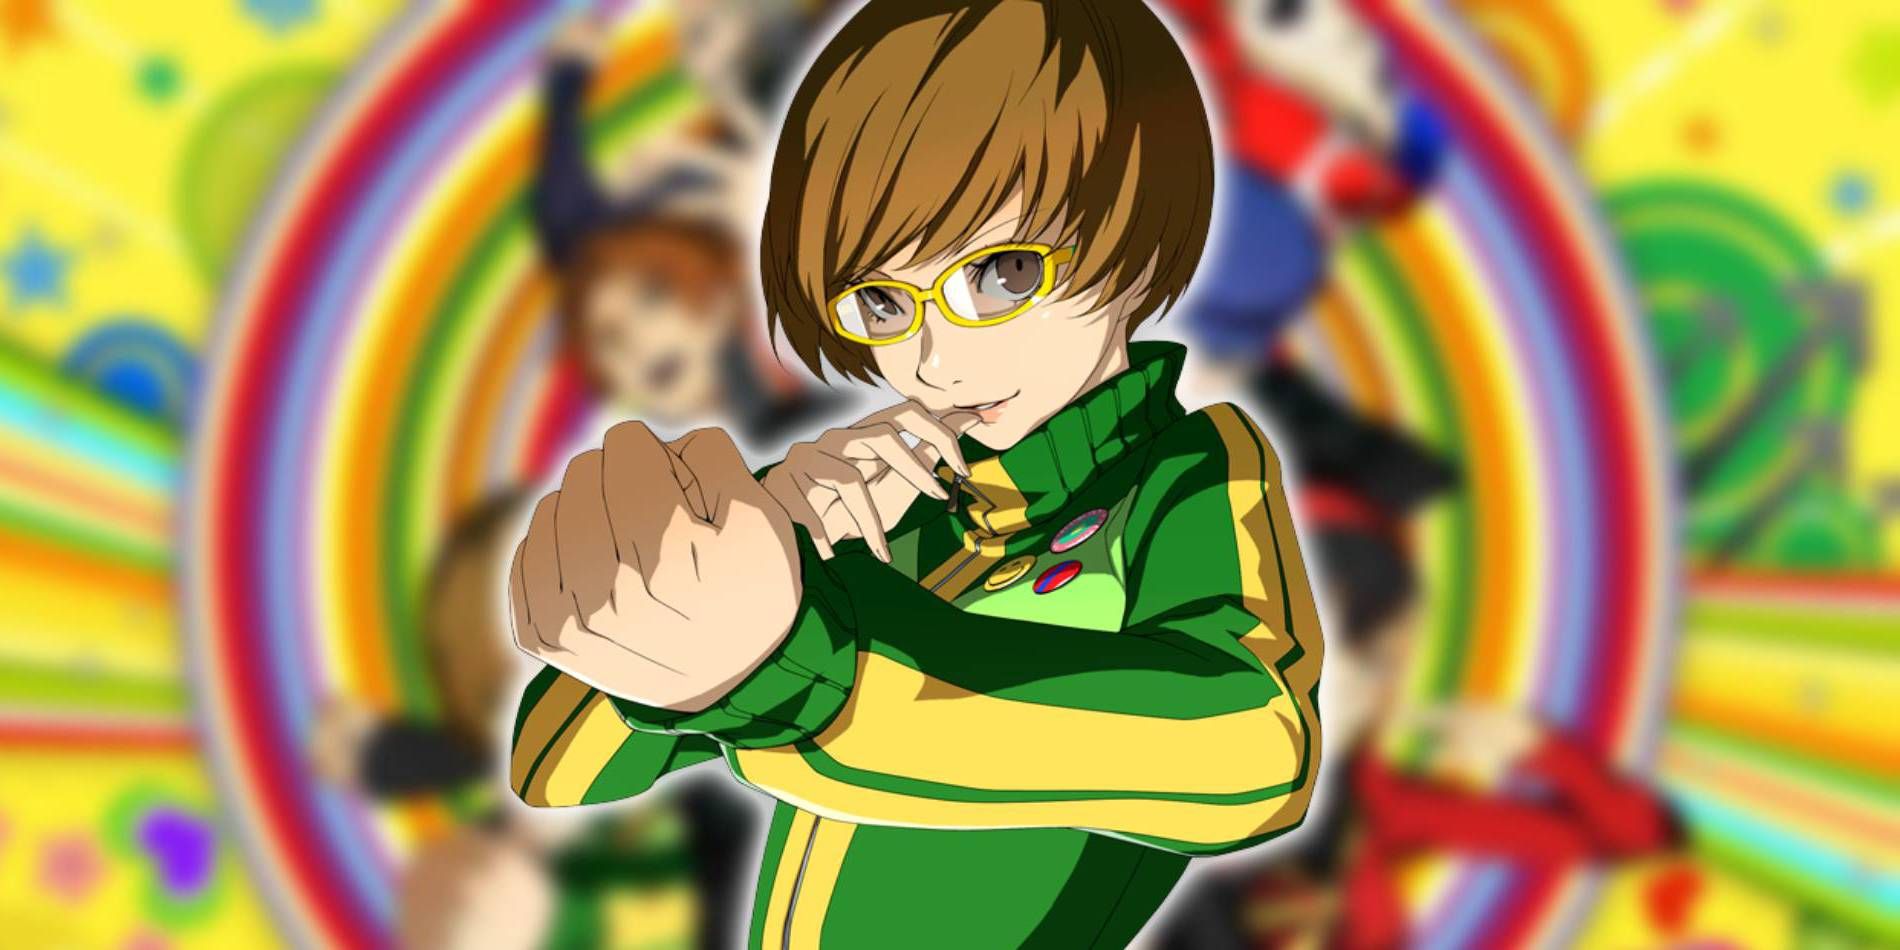 Persona 4 Golden Chie Satonaka Promotional Image With Game Coverart as Background